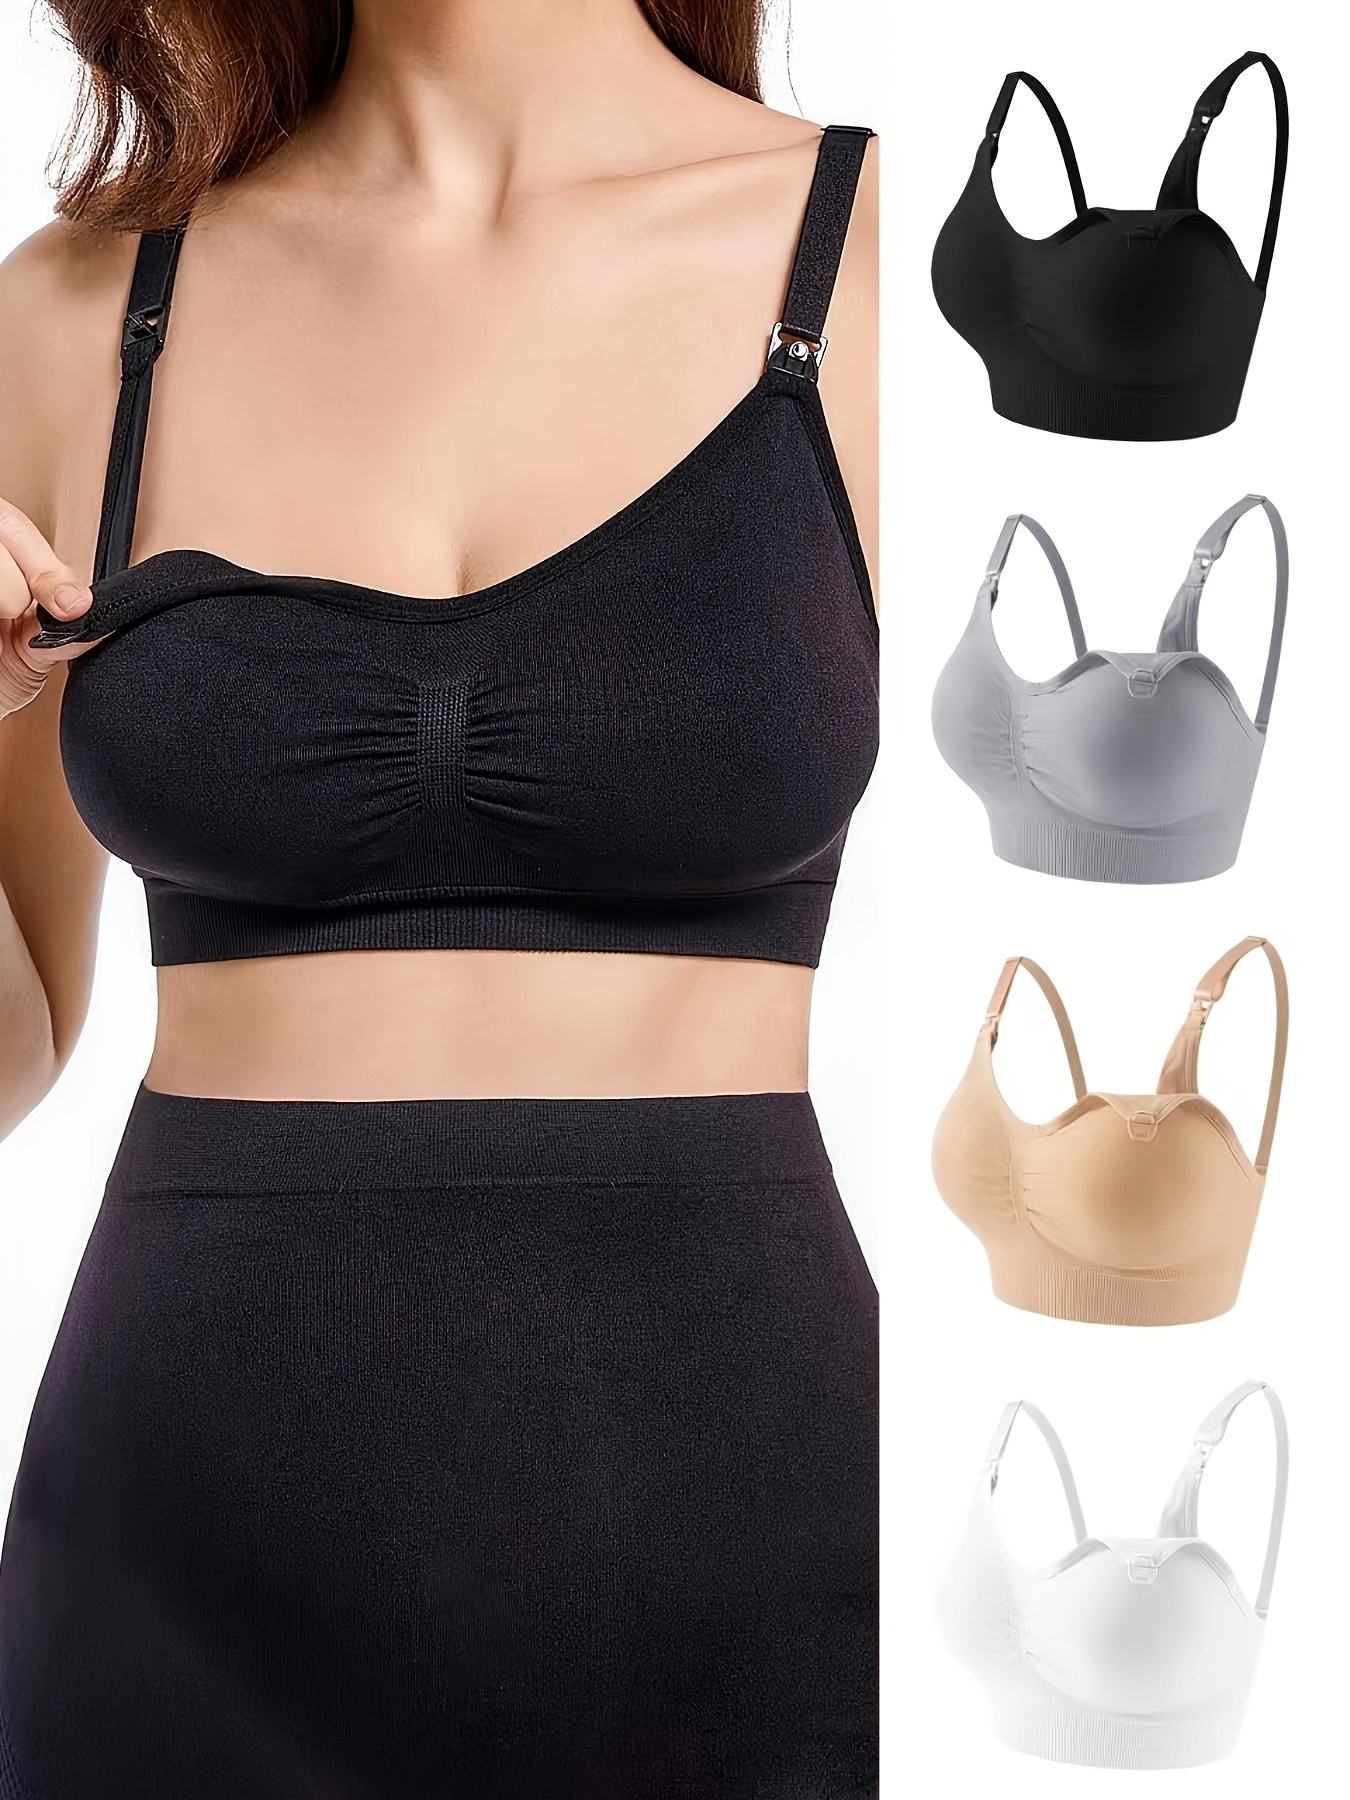 Pregnant Women's Nursing Bras, Lace Supportive Breastfeeding Stretchy Comfy  Maternity Bra For Daily Comfort Open Front Button